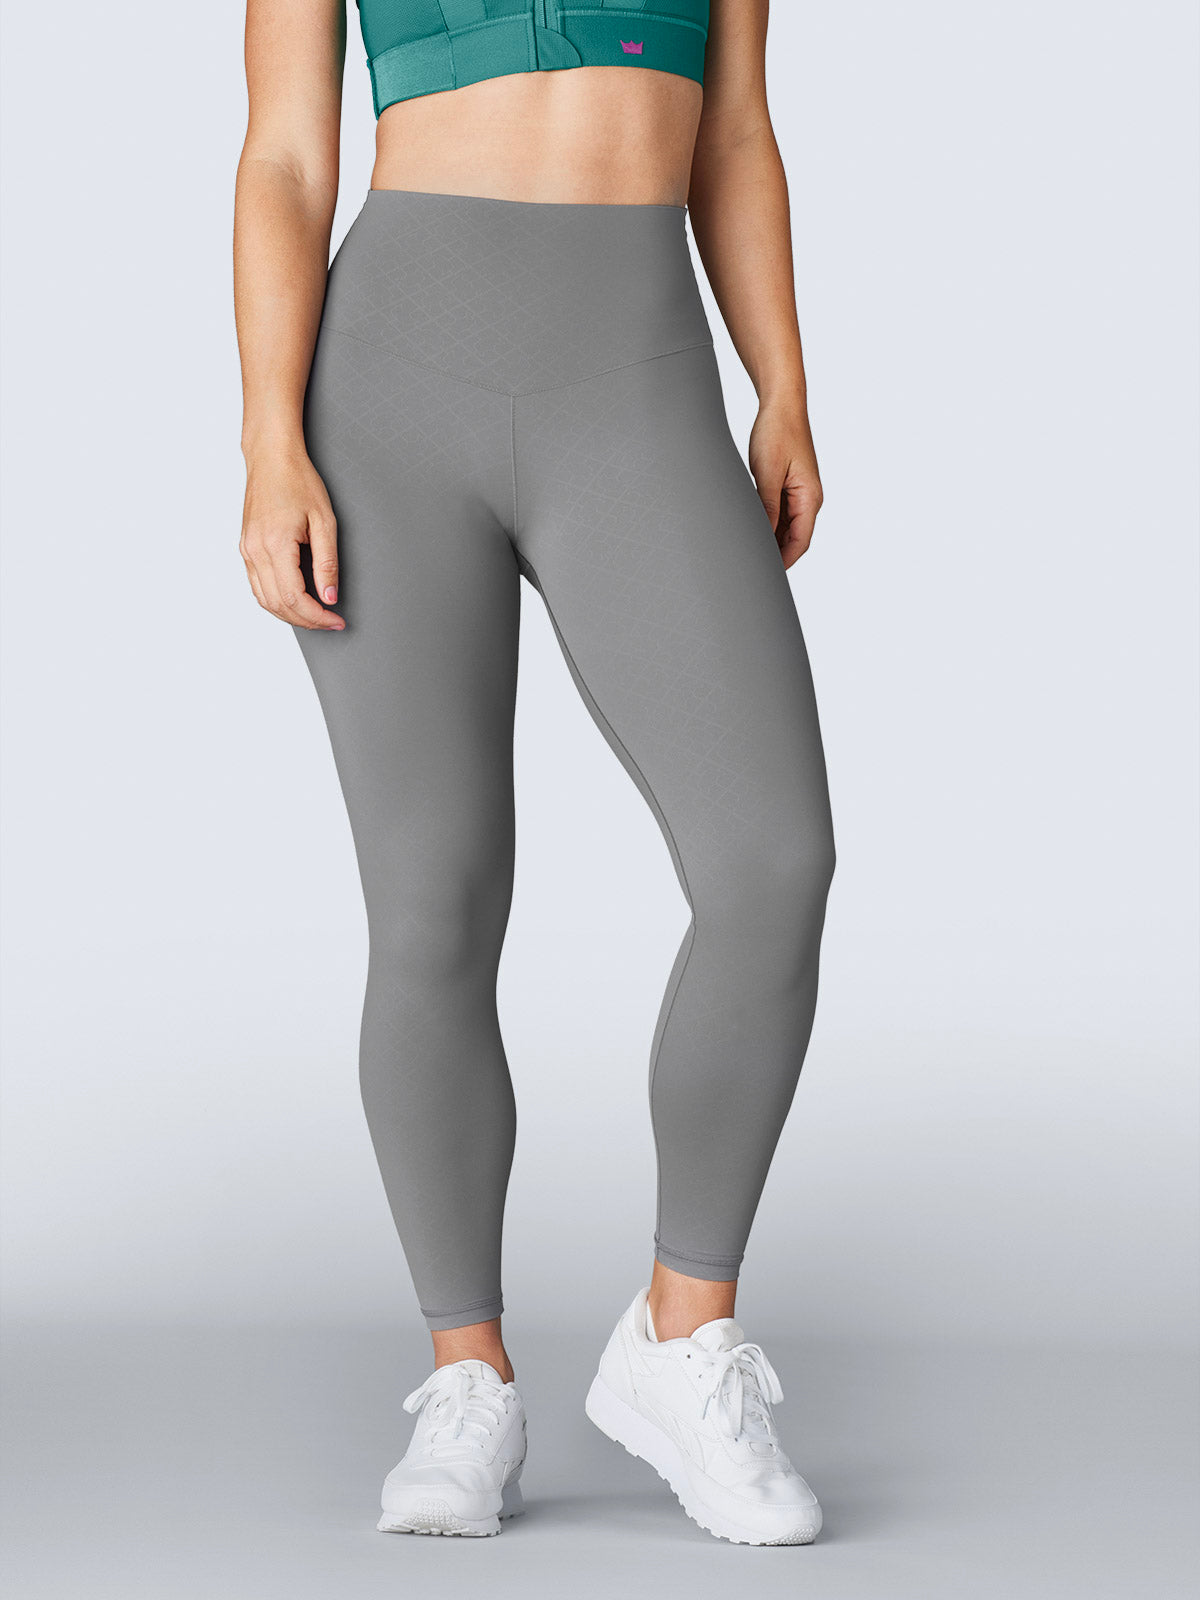 NWT Nike JUST DO IT Gray Leggings High Rise Full Length Tight Fit